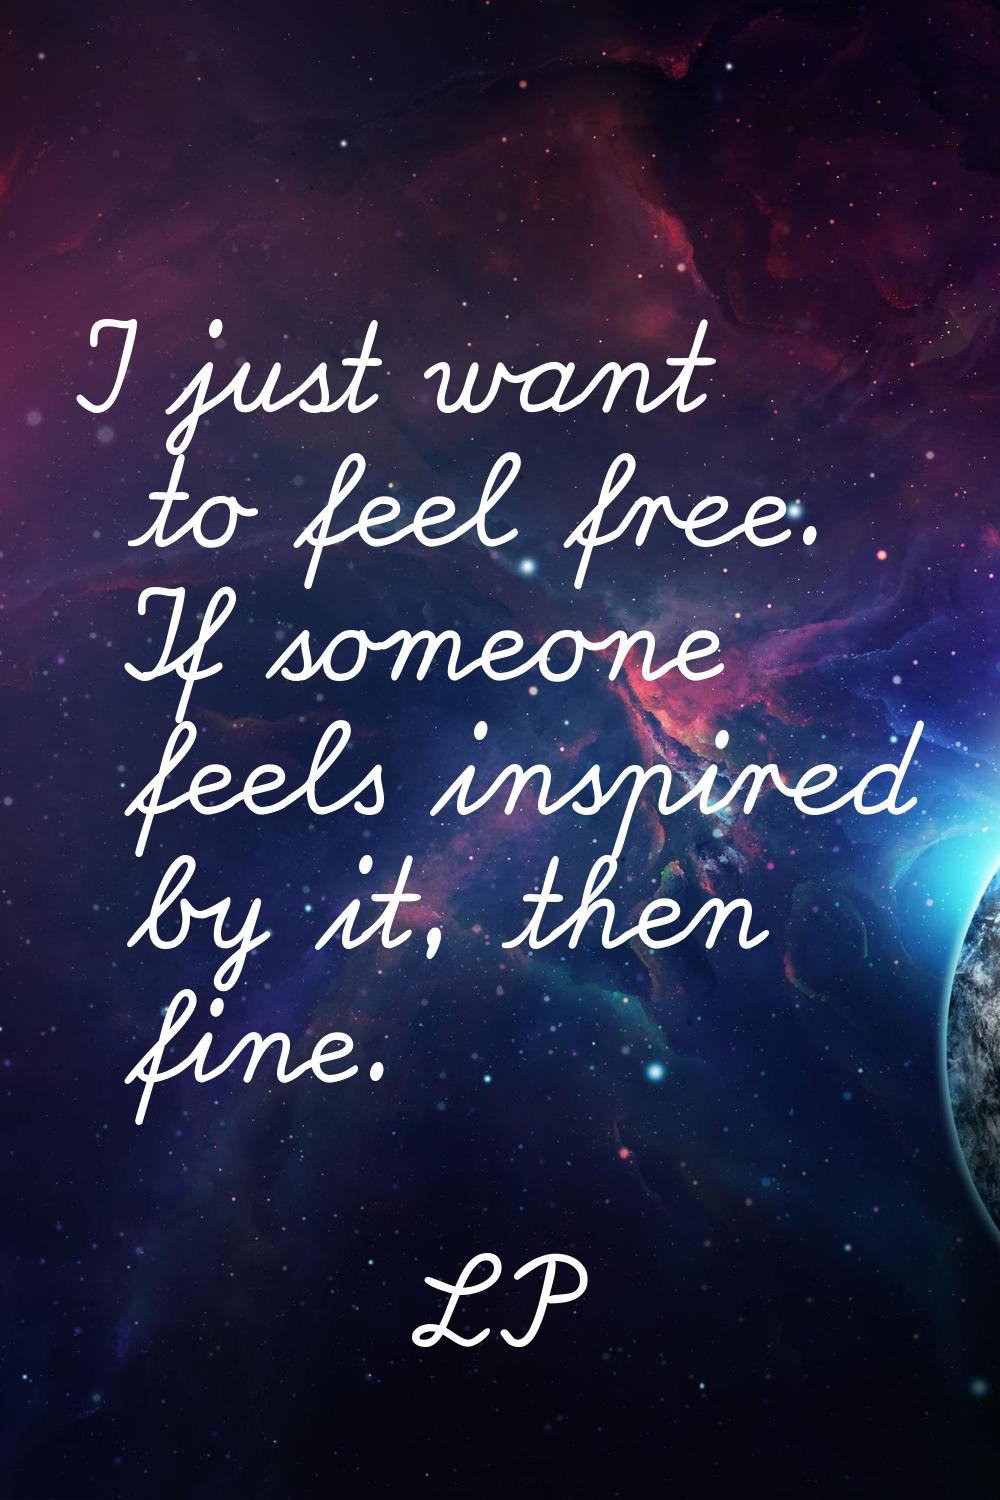 I just want to feel free. If someone feels inspired by it, then fine.